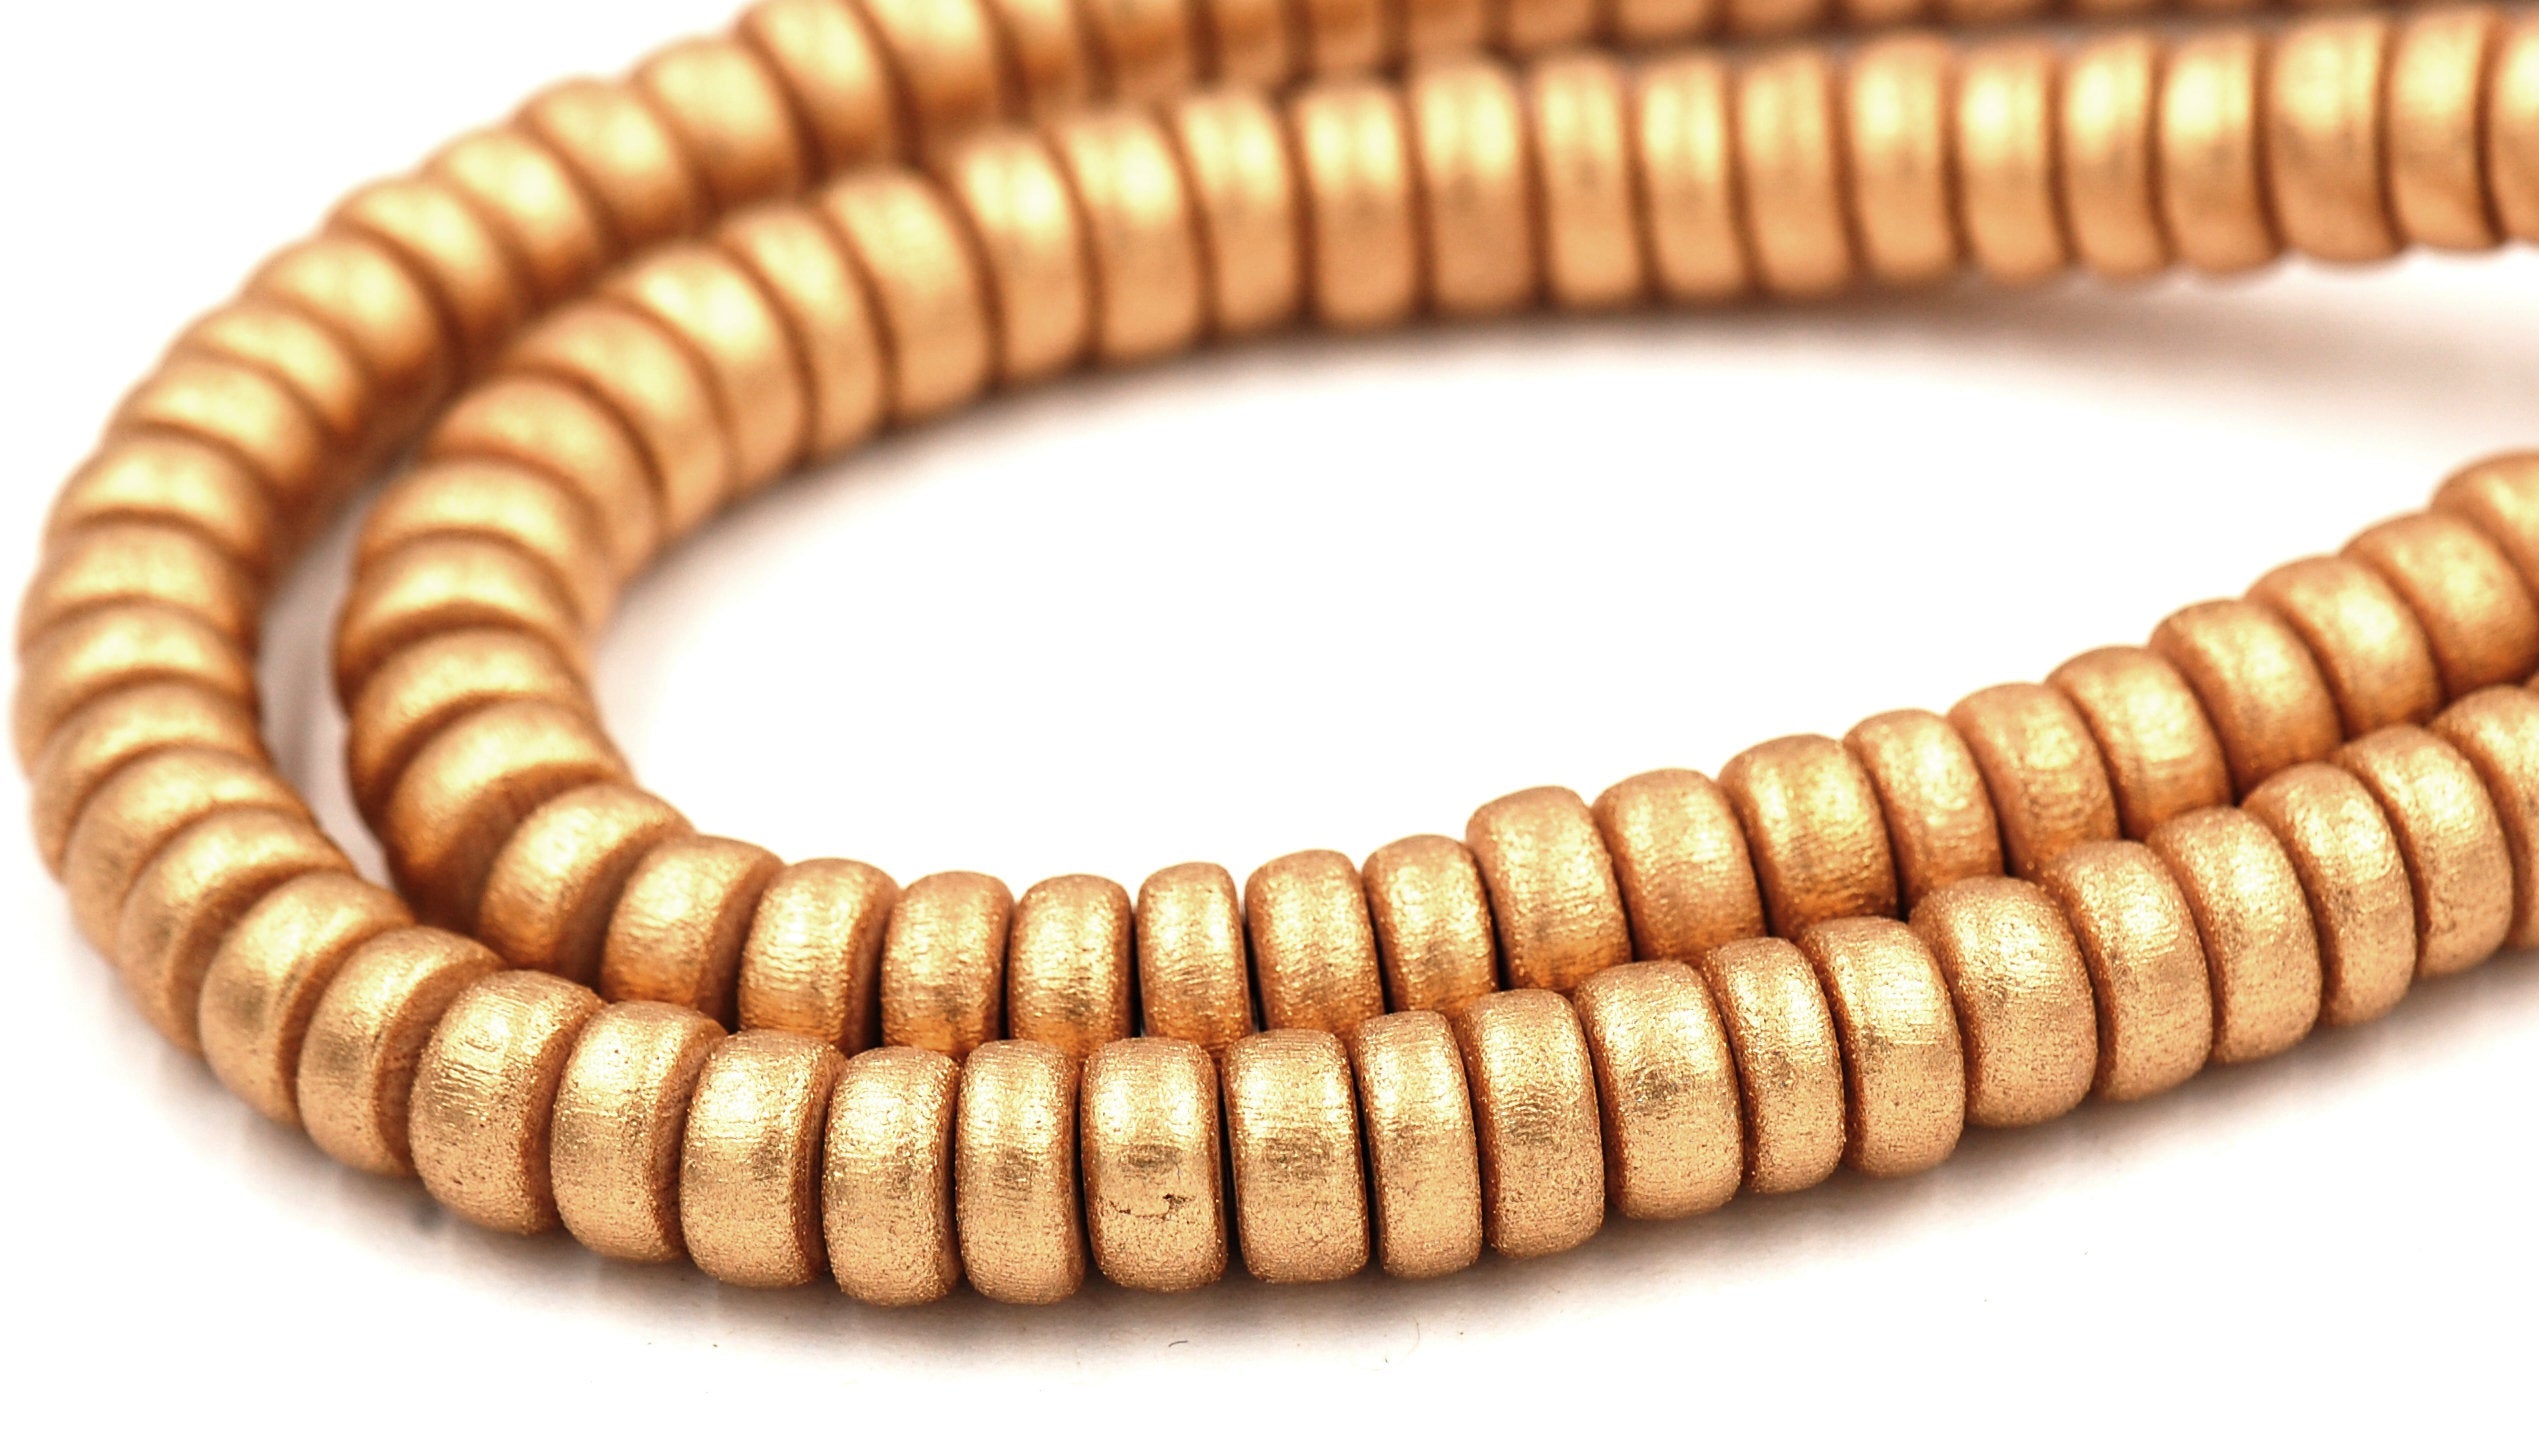 Gold Wood Beads 6mm, 8mm, 10mm, 12mm 16mm Round Gold Wood Rondelle 8x4mm -16 inch strand